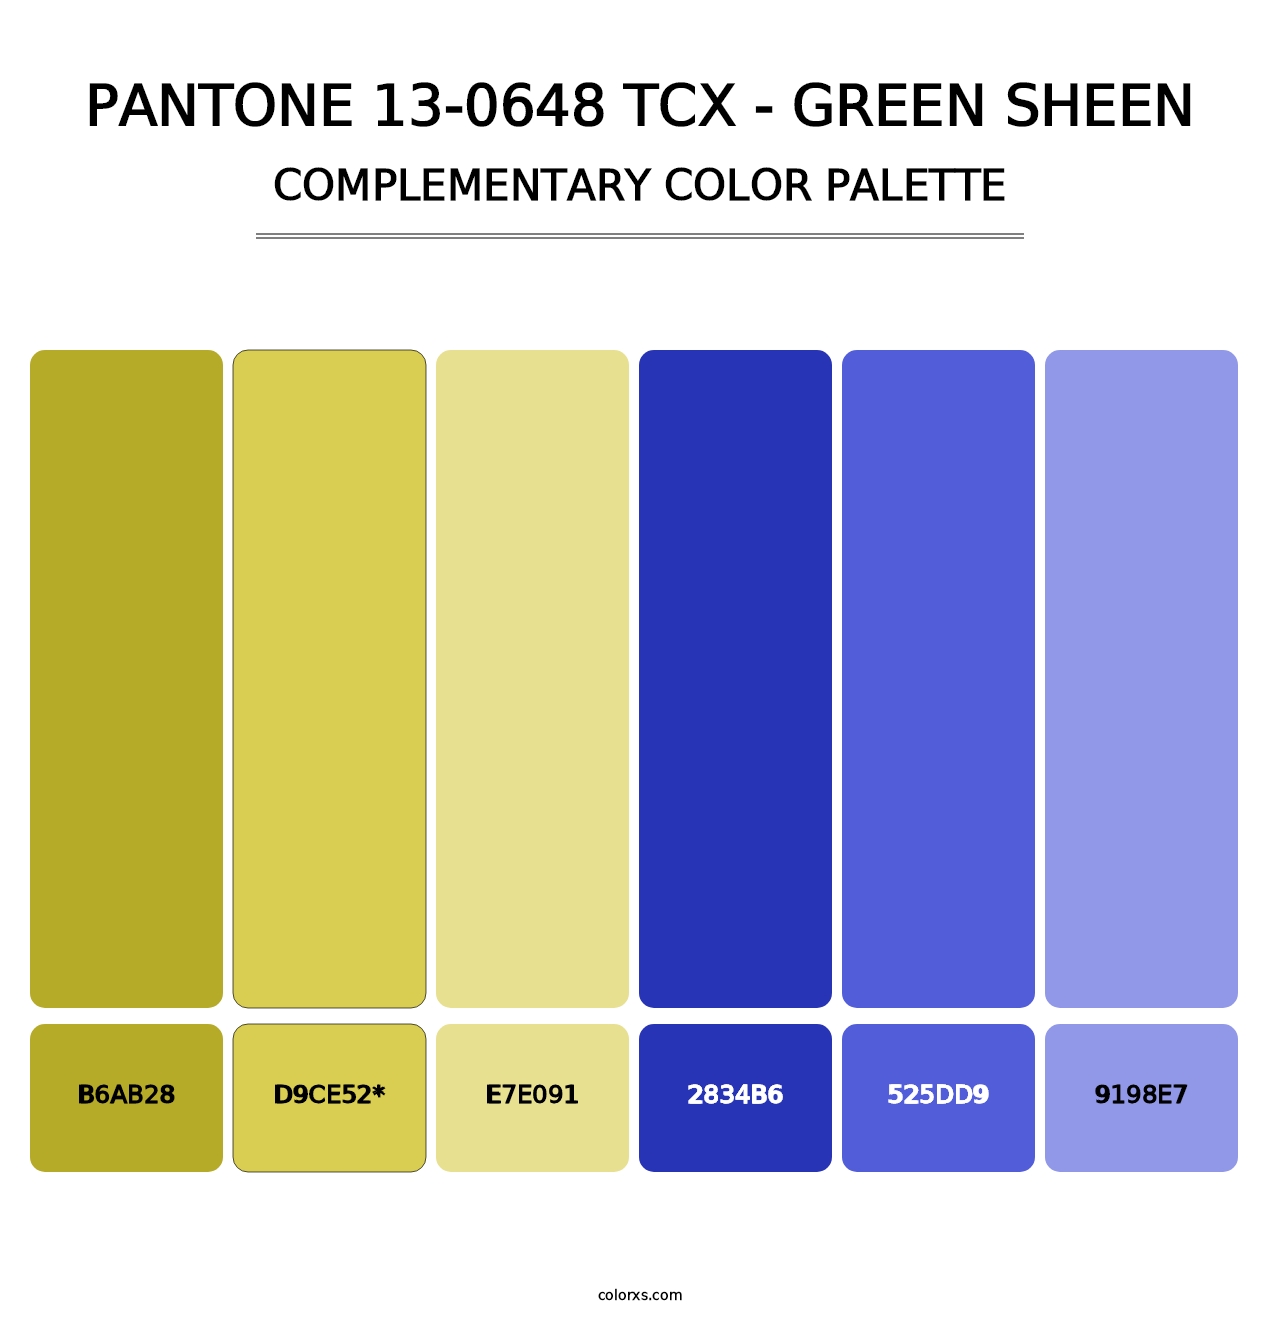 PANTONE 13-0648 TCX - Green Sheen - Complementary Color Palette